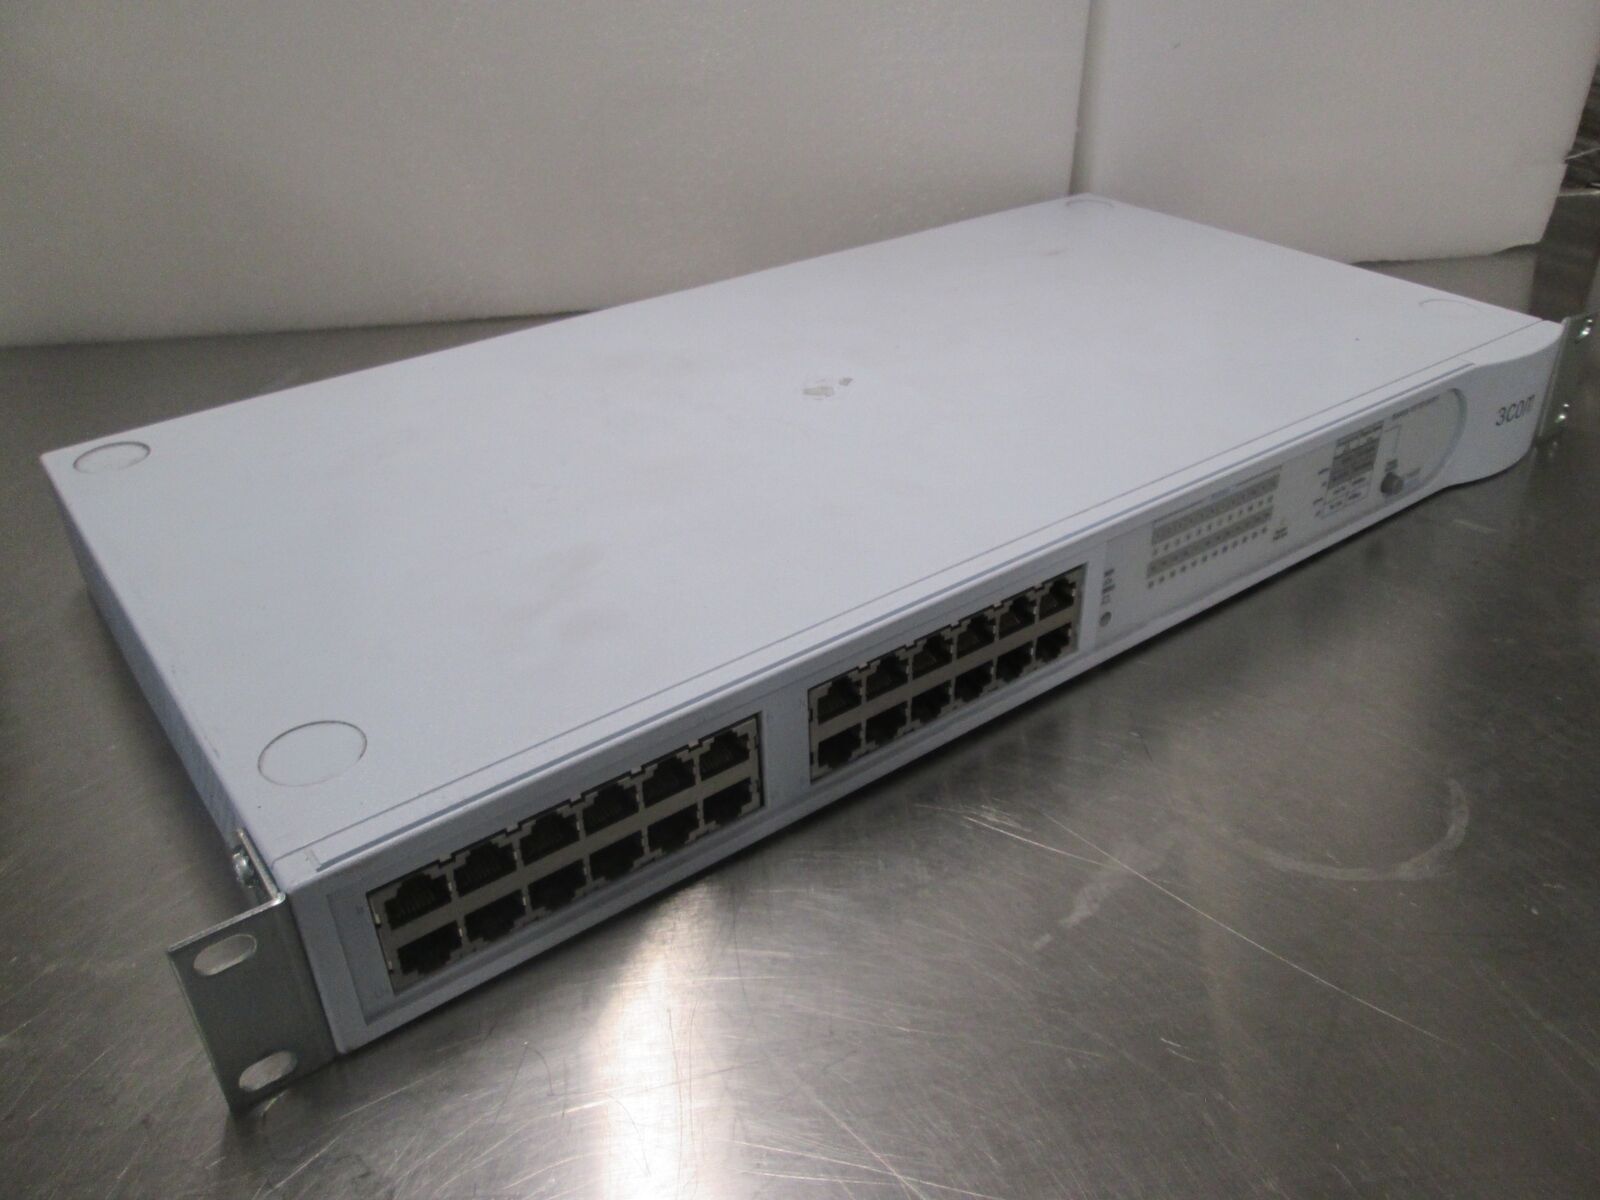 3Com, 24 Port Switch, SuperStack, 3C16465B, Ethernet Switch, Used